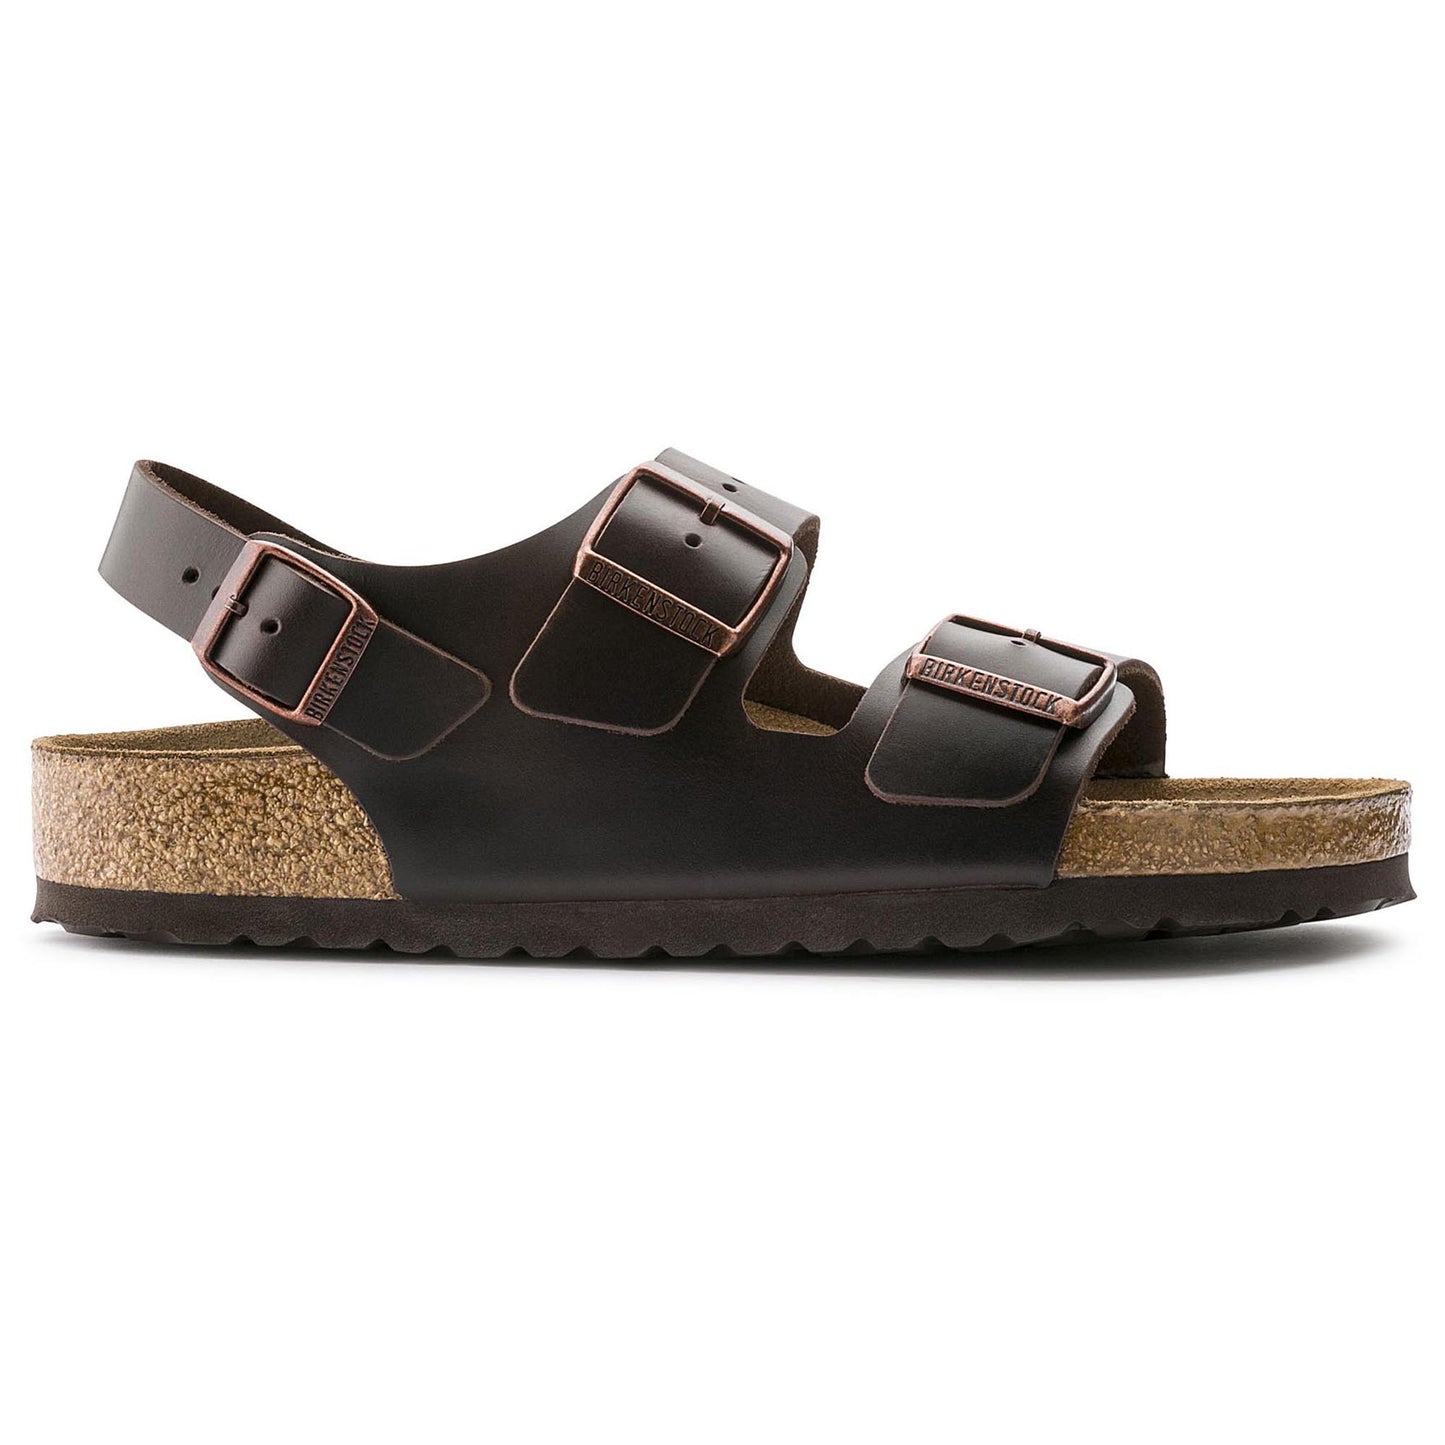 Unisex Milano Soft Footbed Smooth Leather Slides